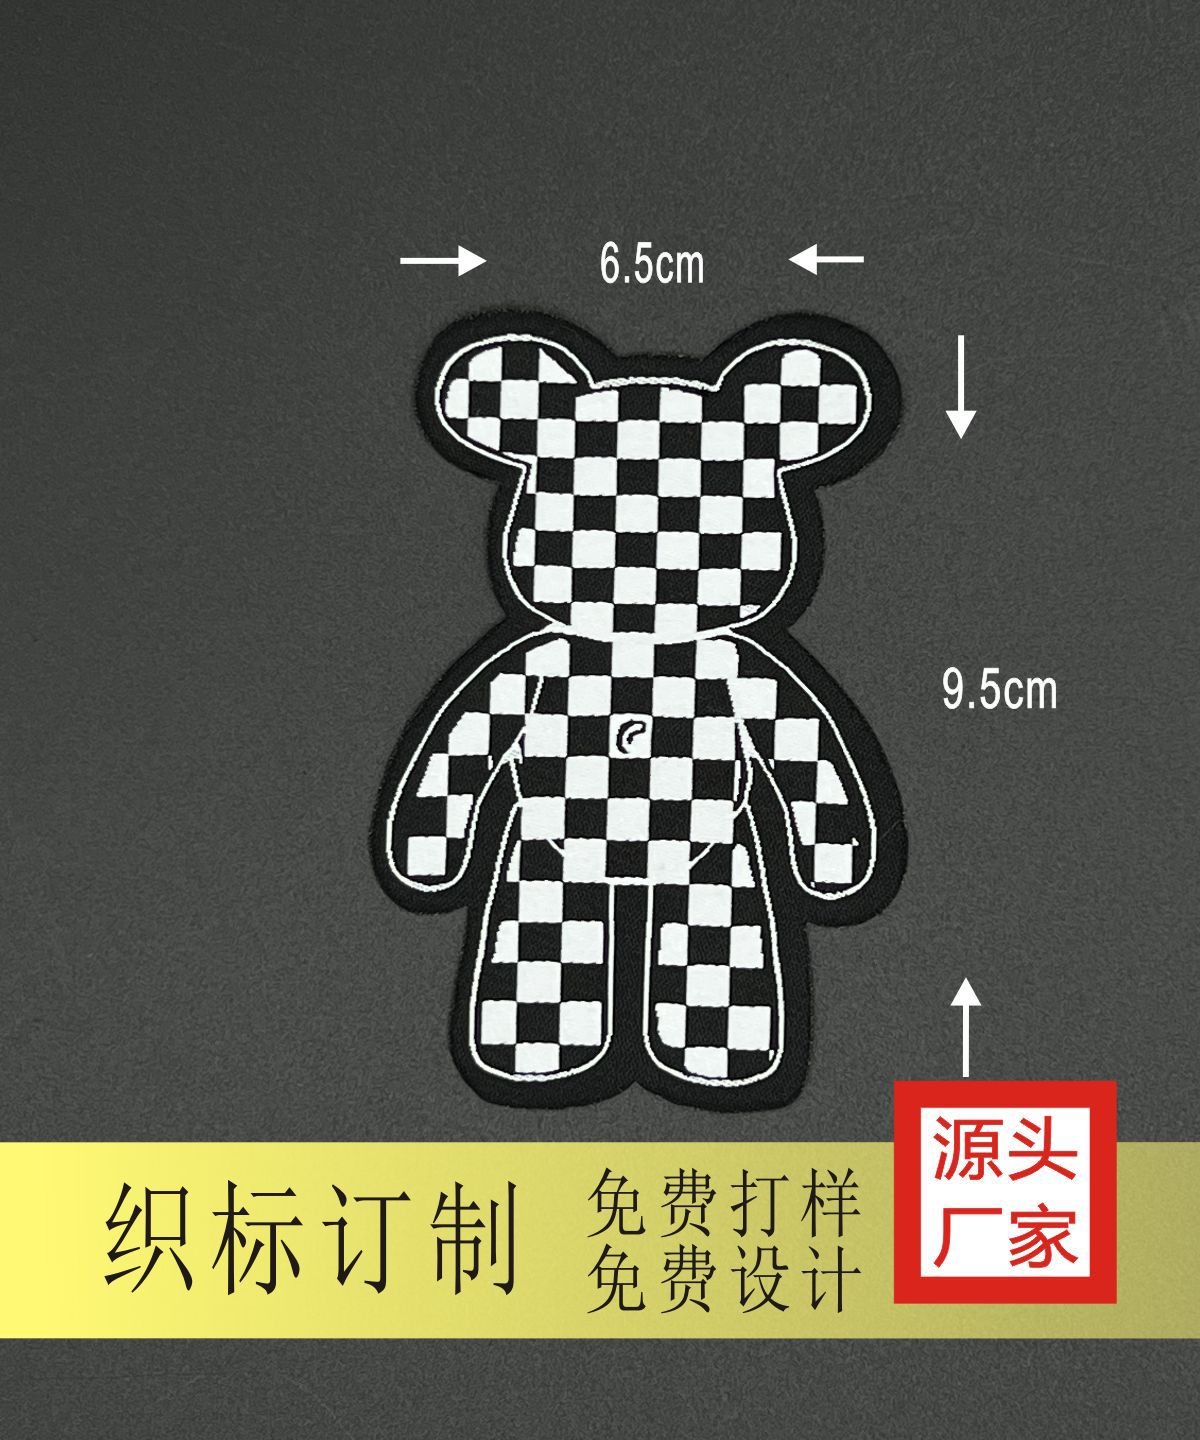 Spot Clothing Accessories Weaving Mark Trademark Cloth Label Decorative Labeling Chessboard Lattice Bear Eve R Special-Shaped Label Clothing Accessories